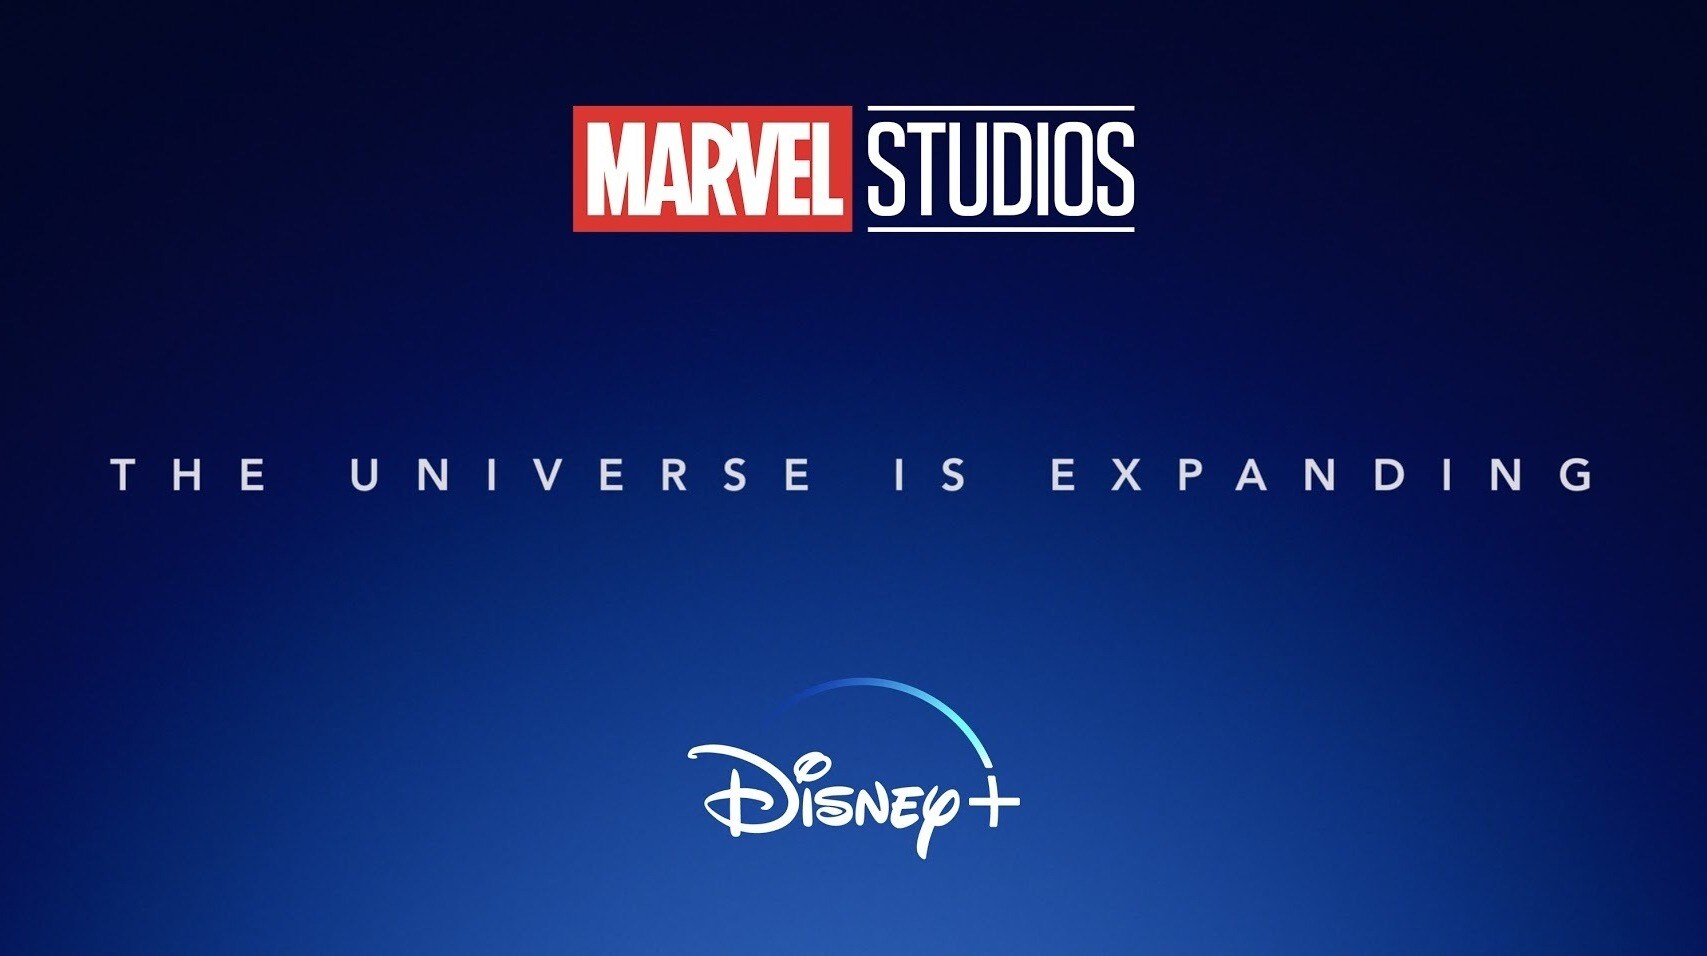 The Universe is expanding | Disney+